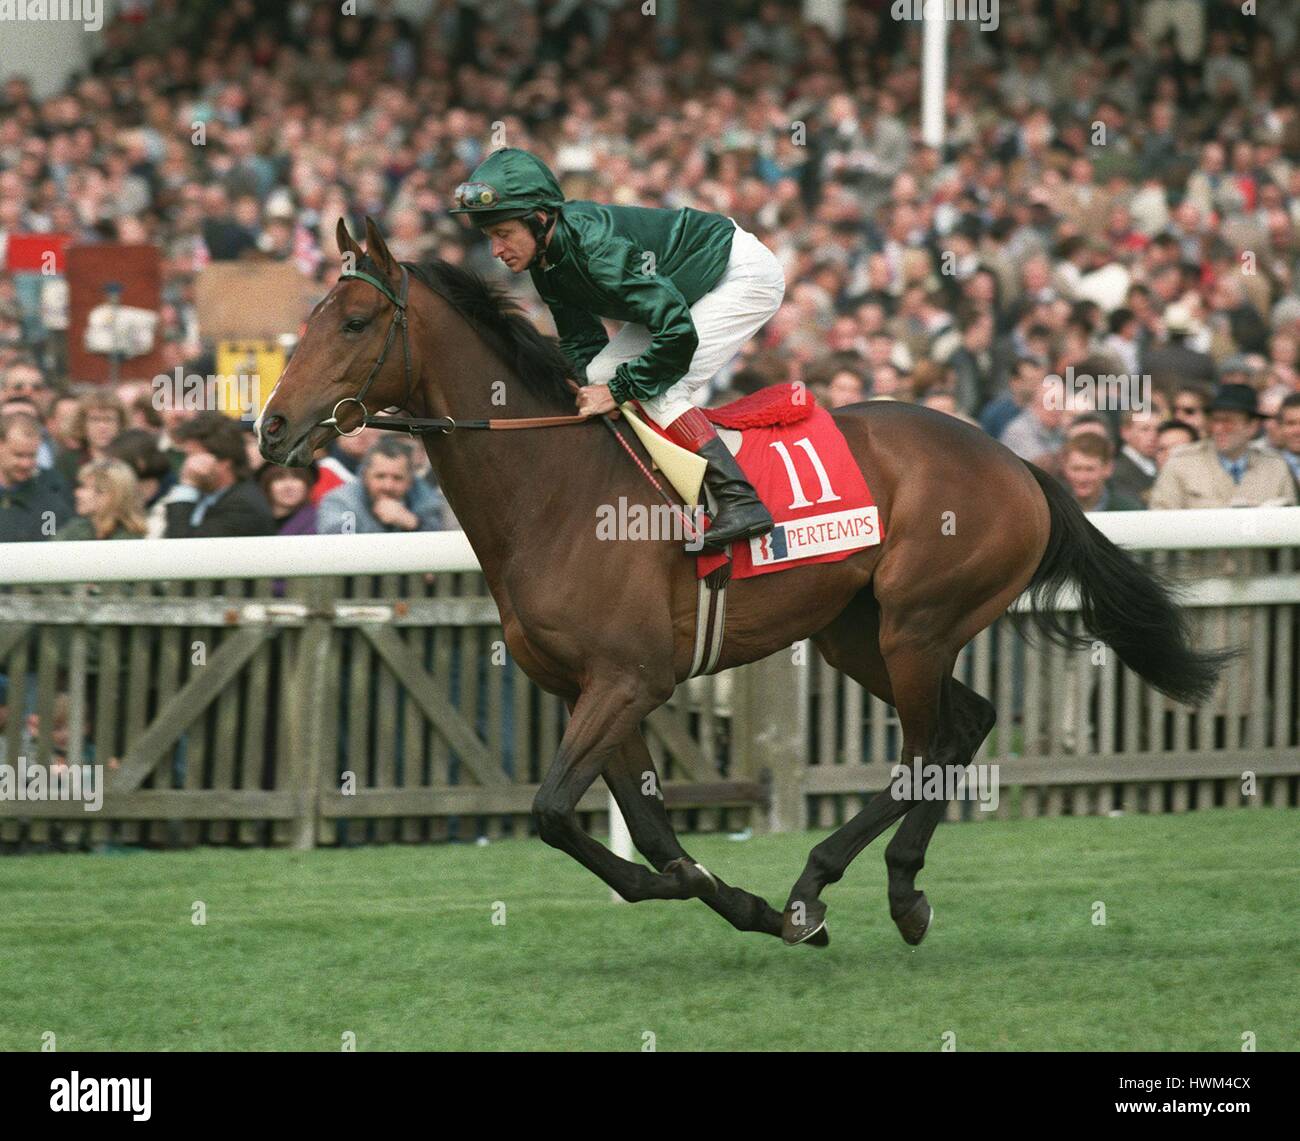 STORM TROOPER RIDDEN BY PAT EDDERY 06 May 1996 Stock Photo